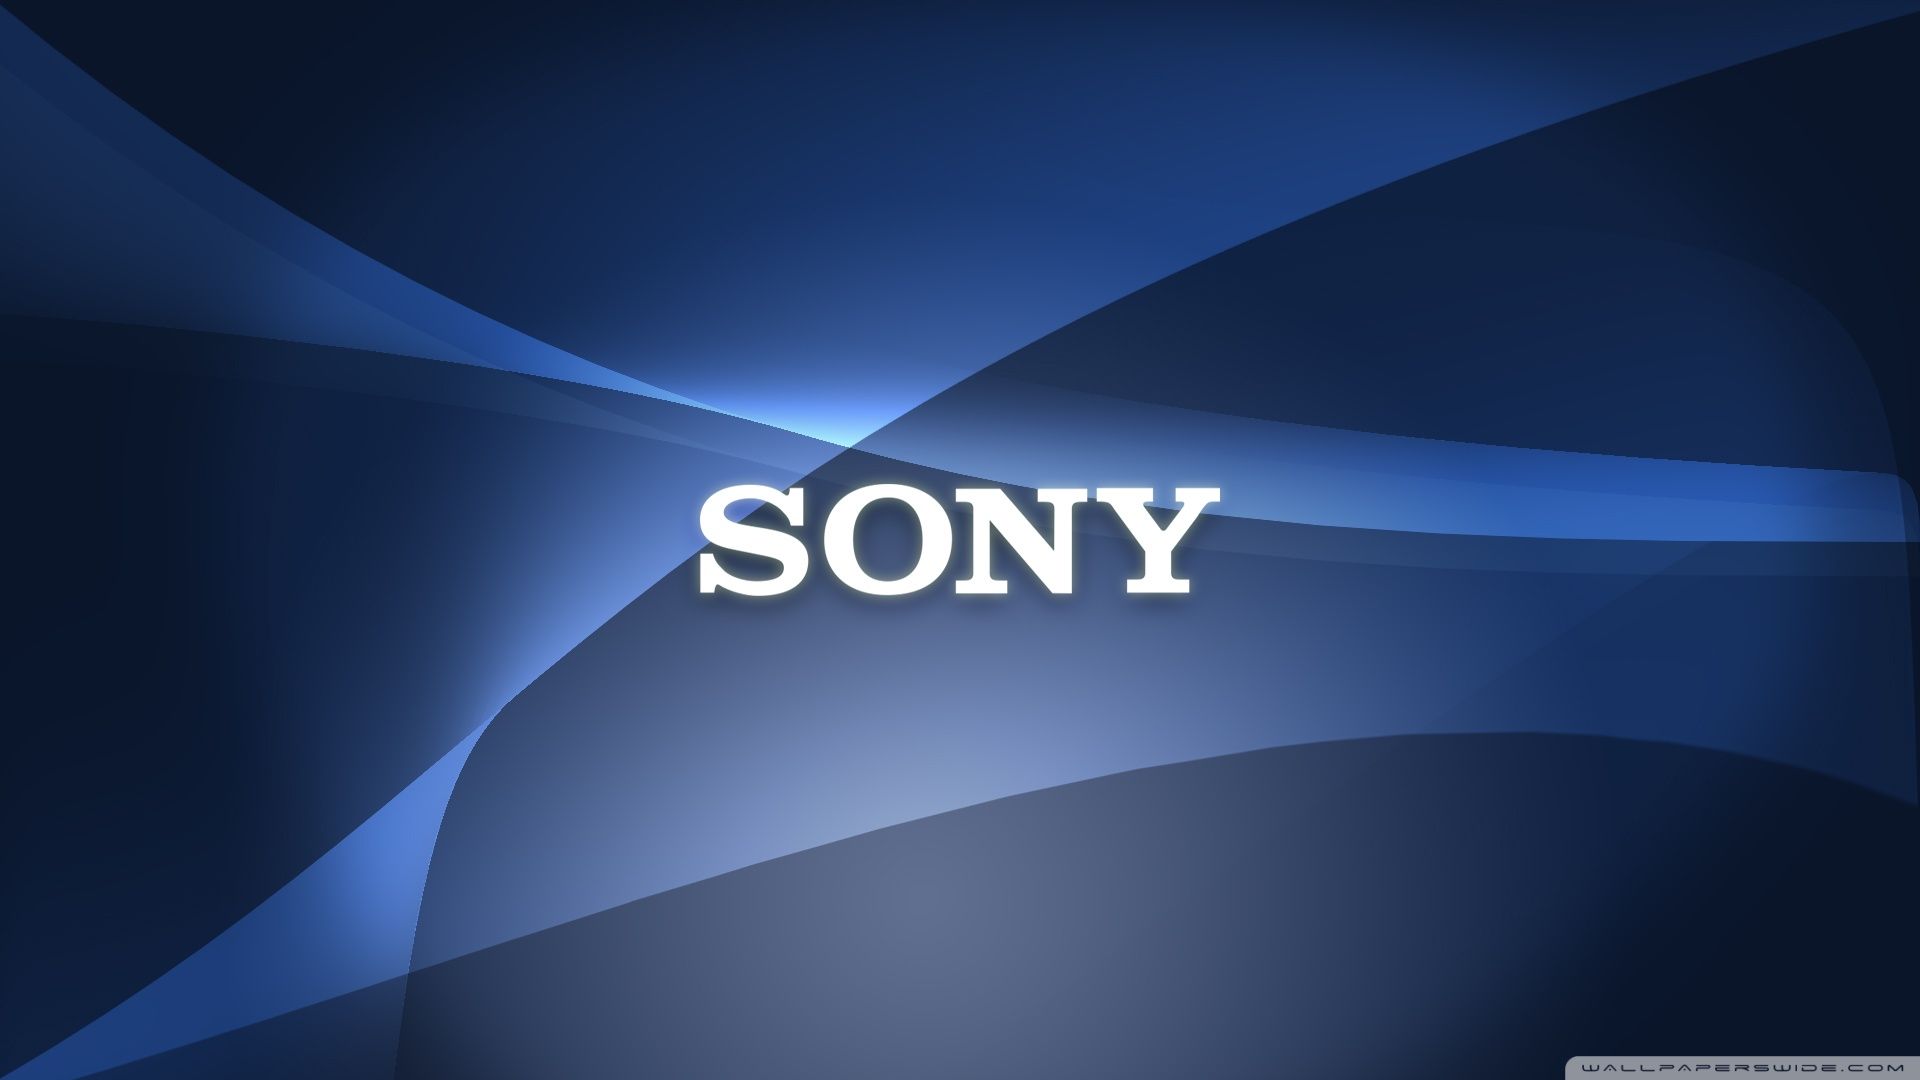 Sony Wallpapers